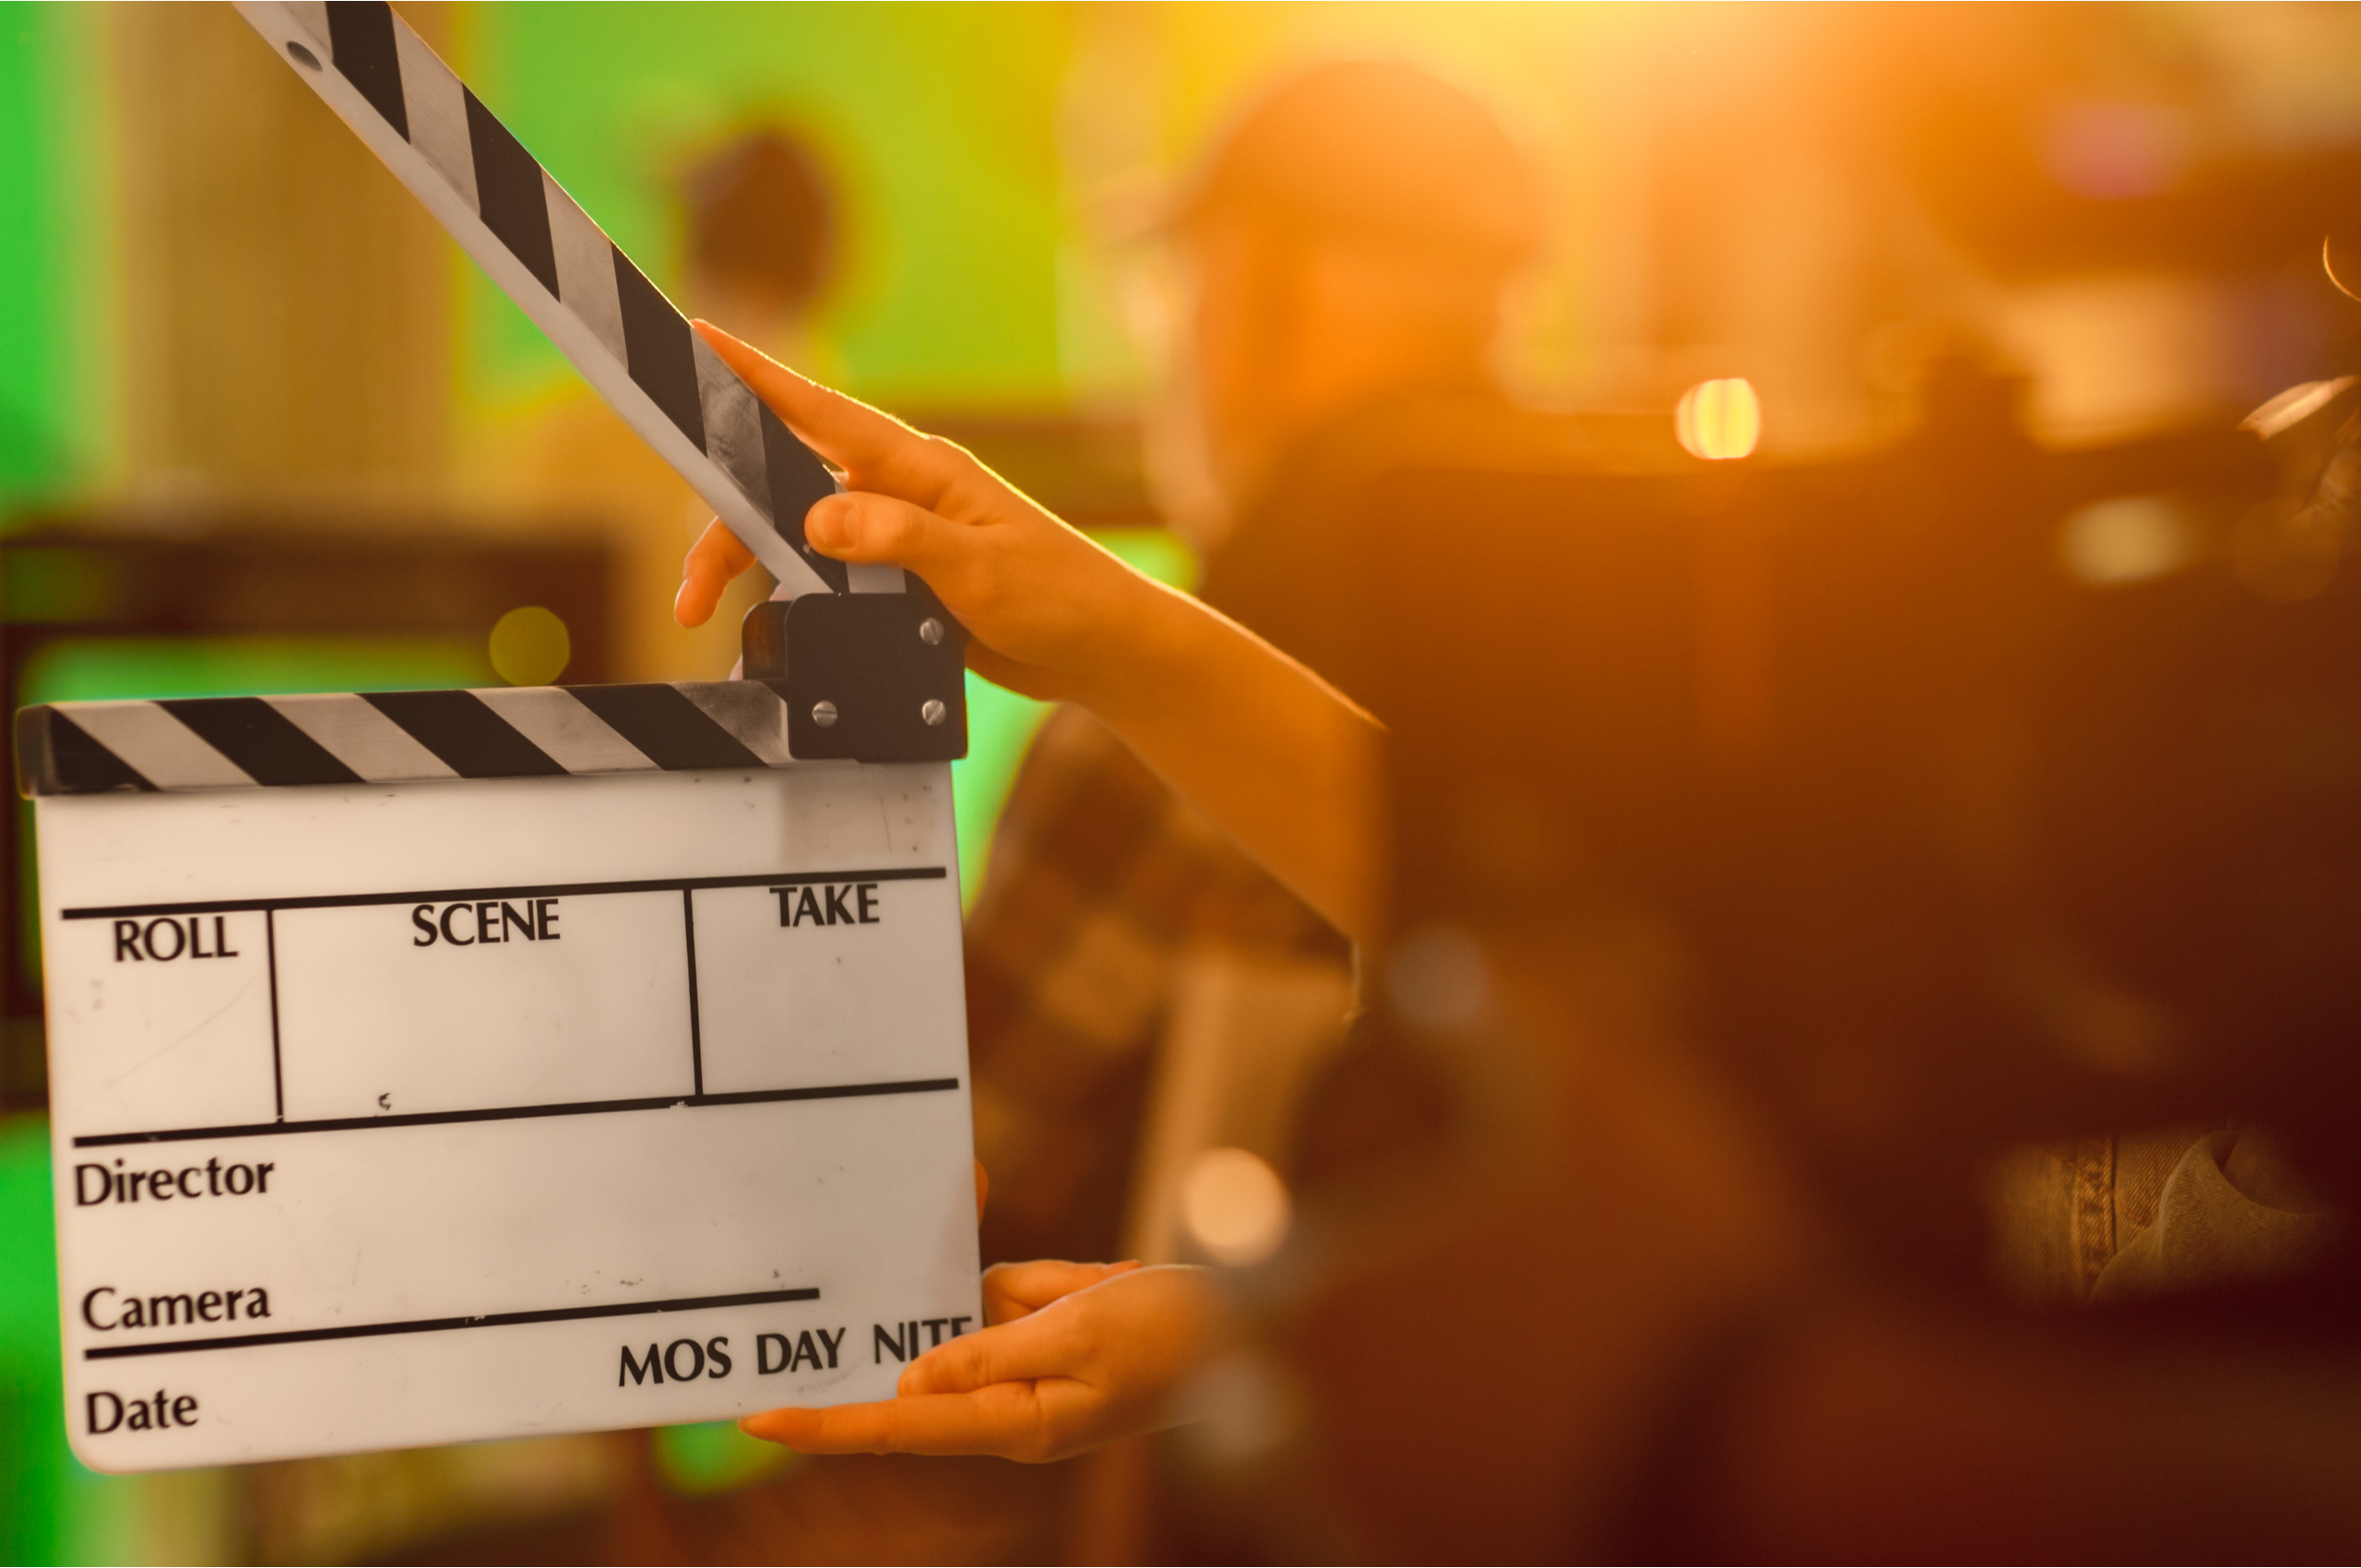 A clapperboard being held up in front of a green screen.